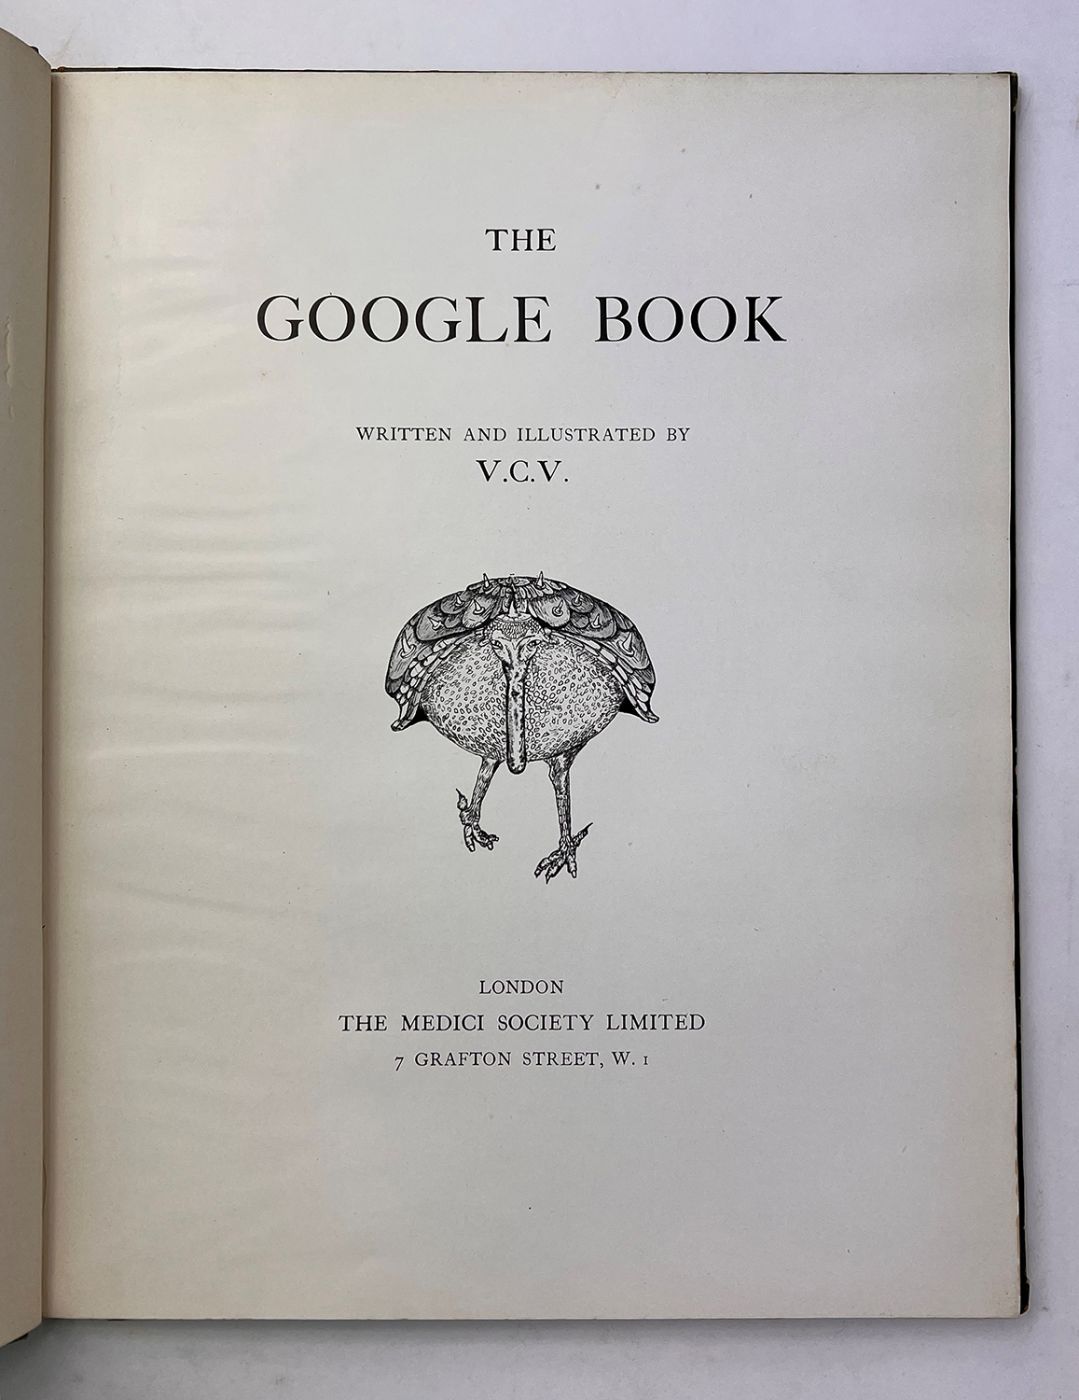 THE GOOGLE BOOK -  image 3